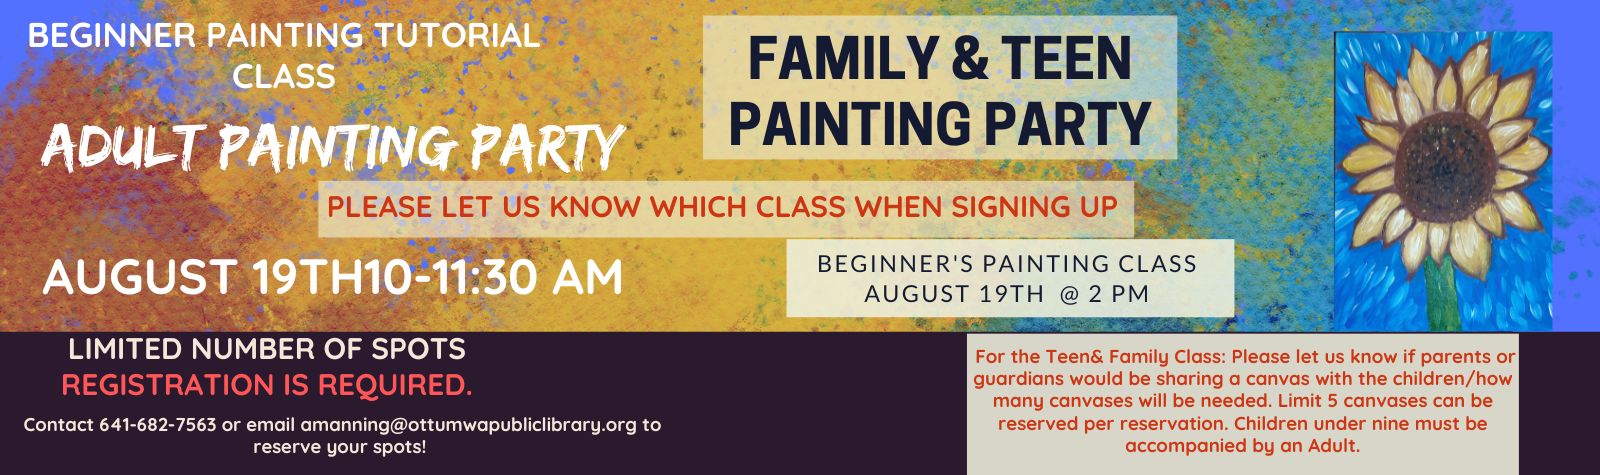 August 19th Both Painting Classes Banner 